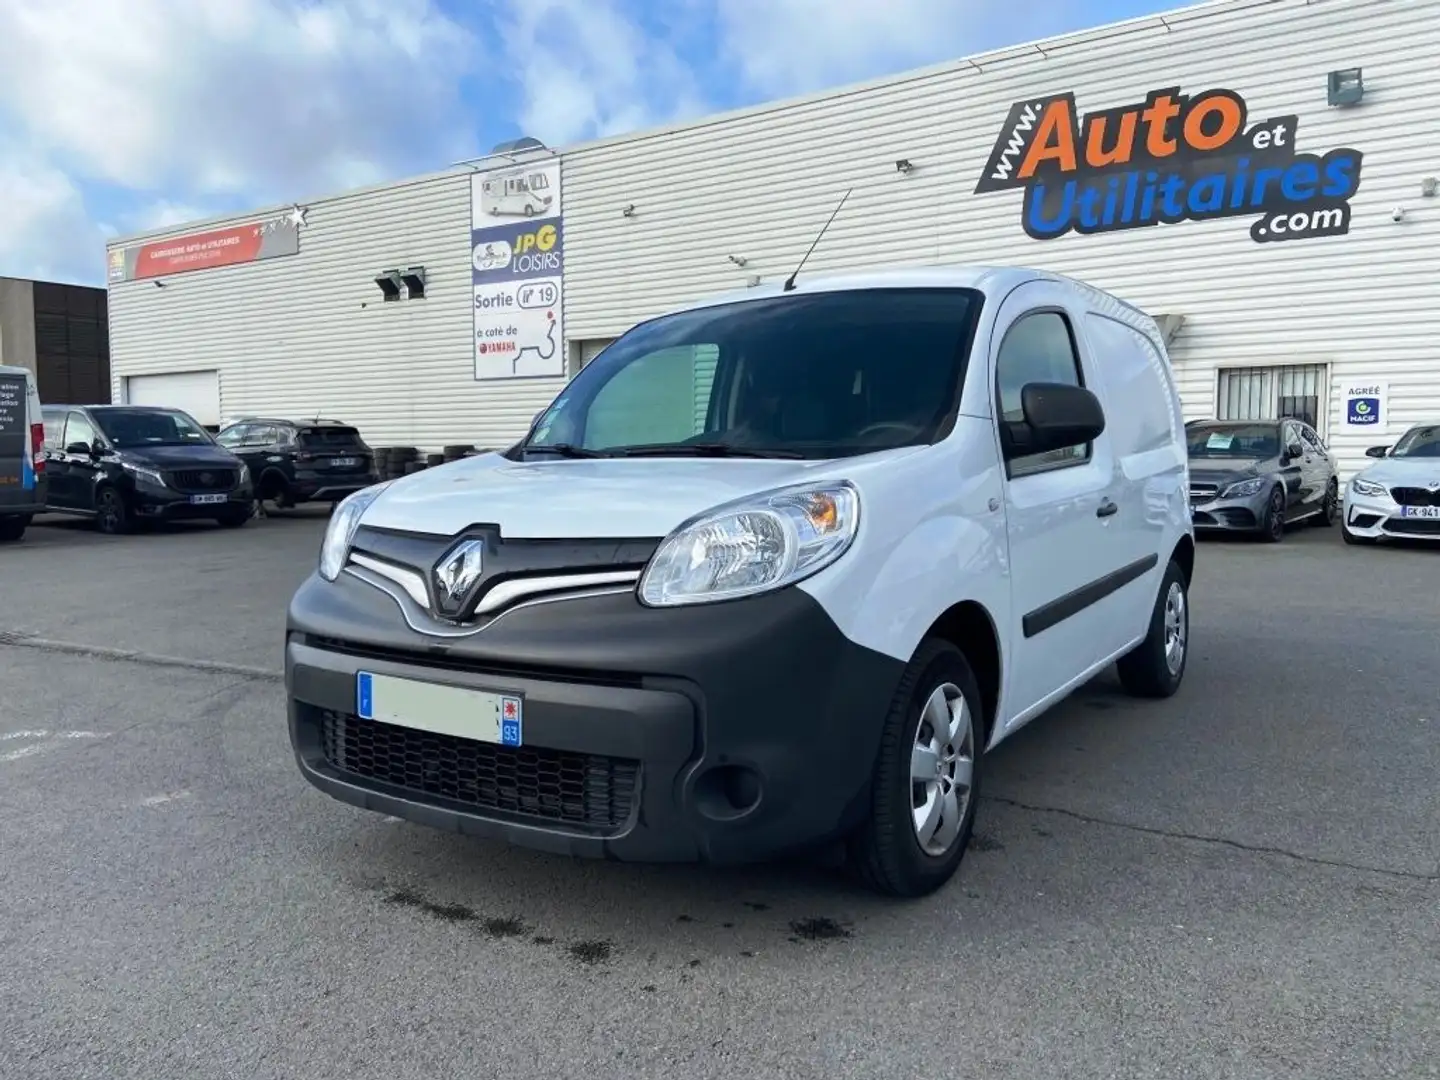 Renault Express 1.5 DCI 75CH ENERGY GRAND CONFORT EURO6 - 1